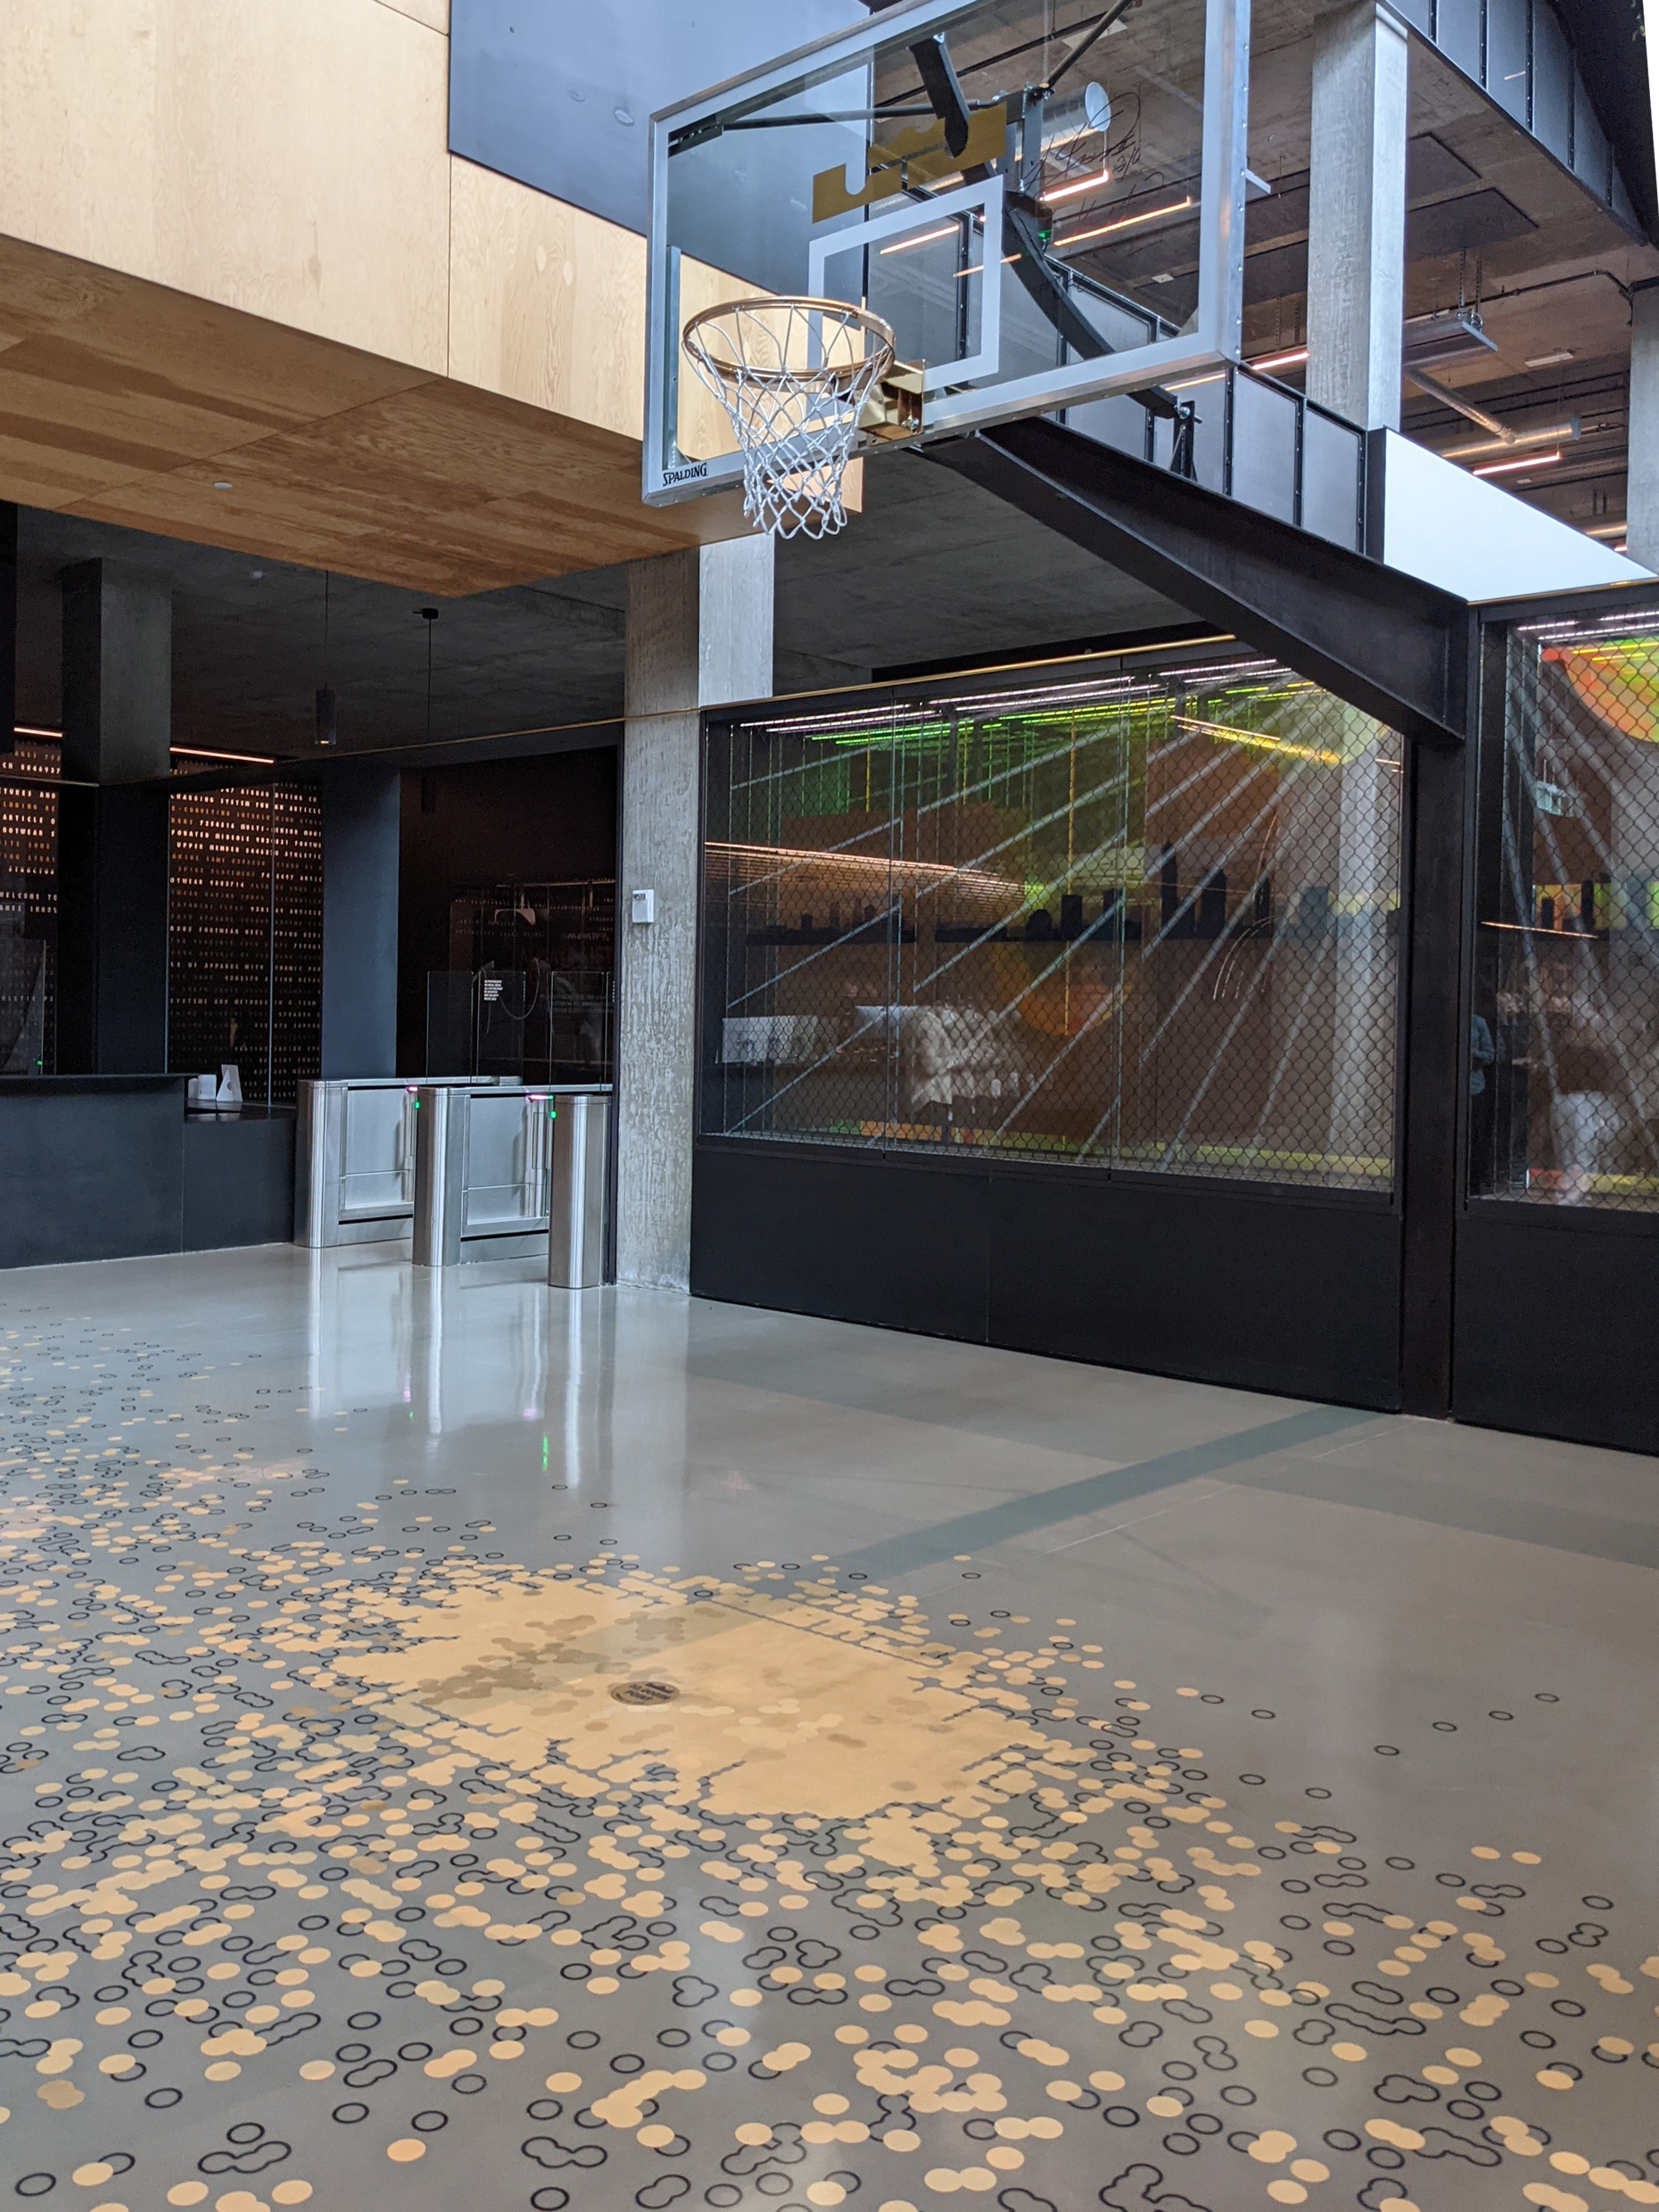 Aanbod Gelach touw See the 8 most amazing sights at Nike's new LeBron James Innovation Center  | brandknewmag:Actionable Intelligence on Advertising,Marketing,Branding